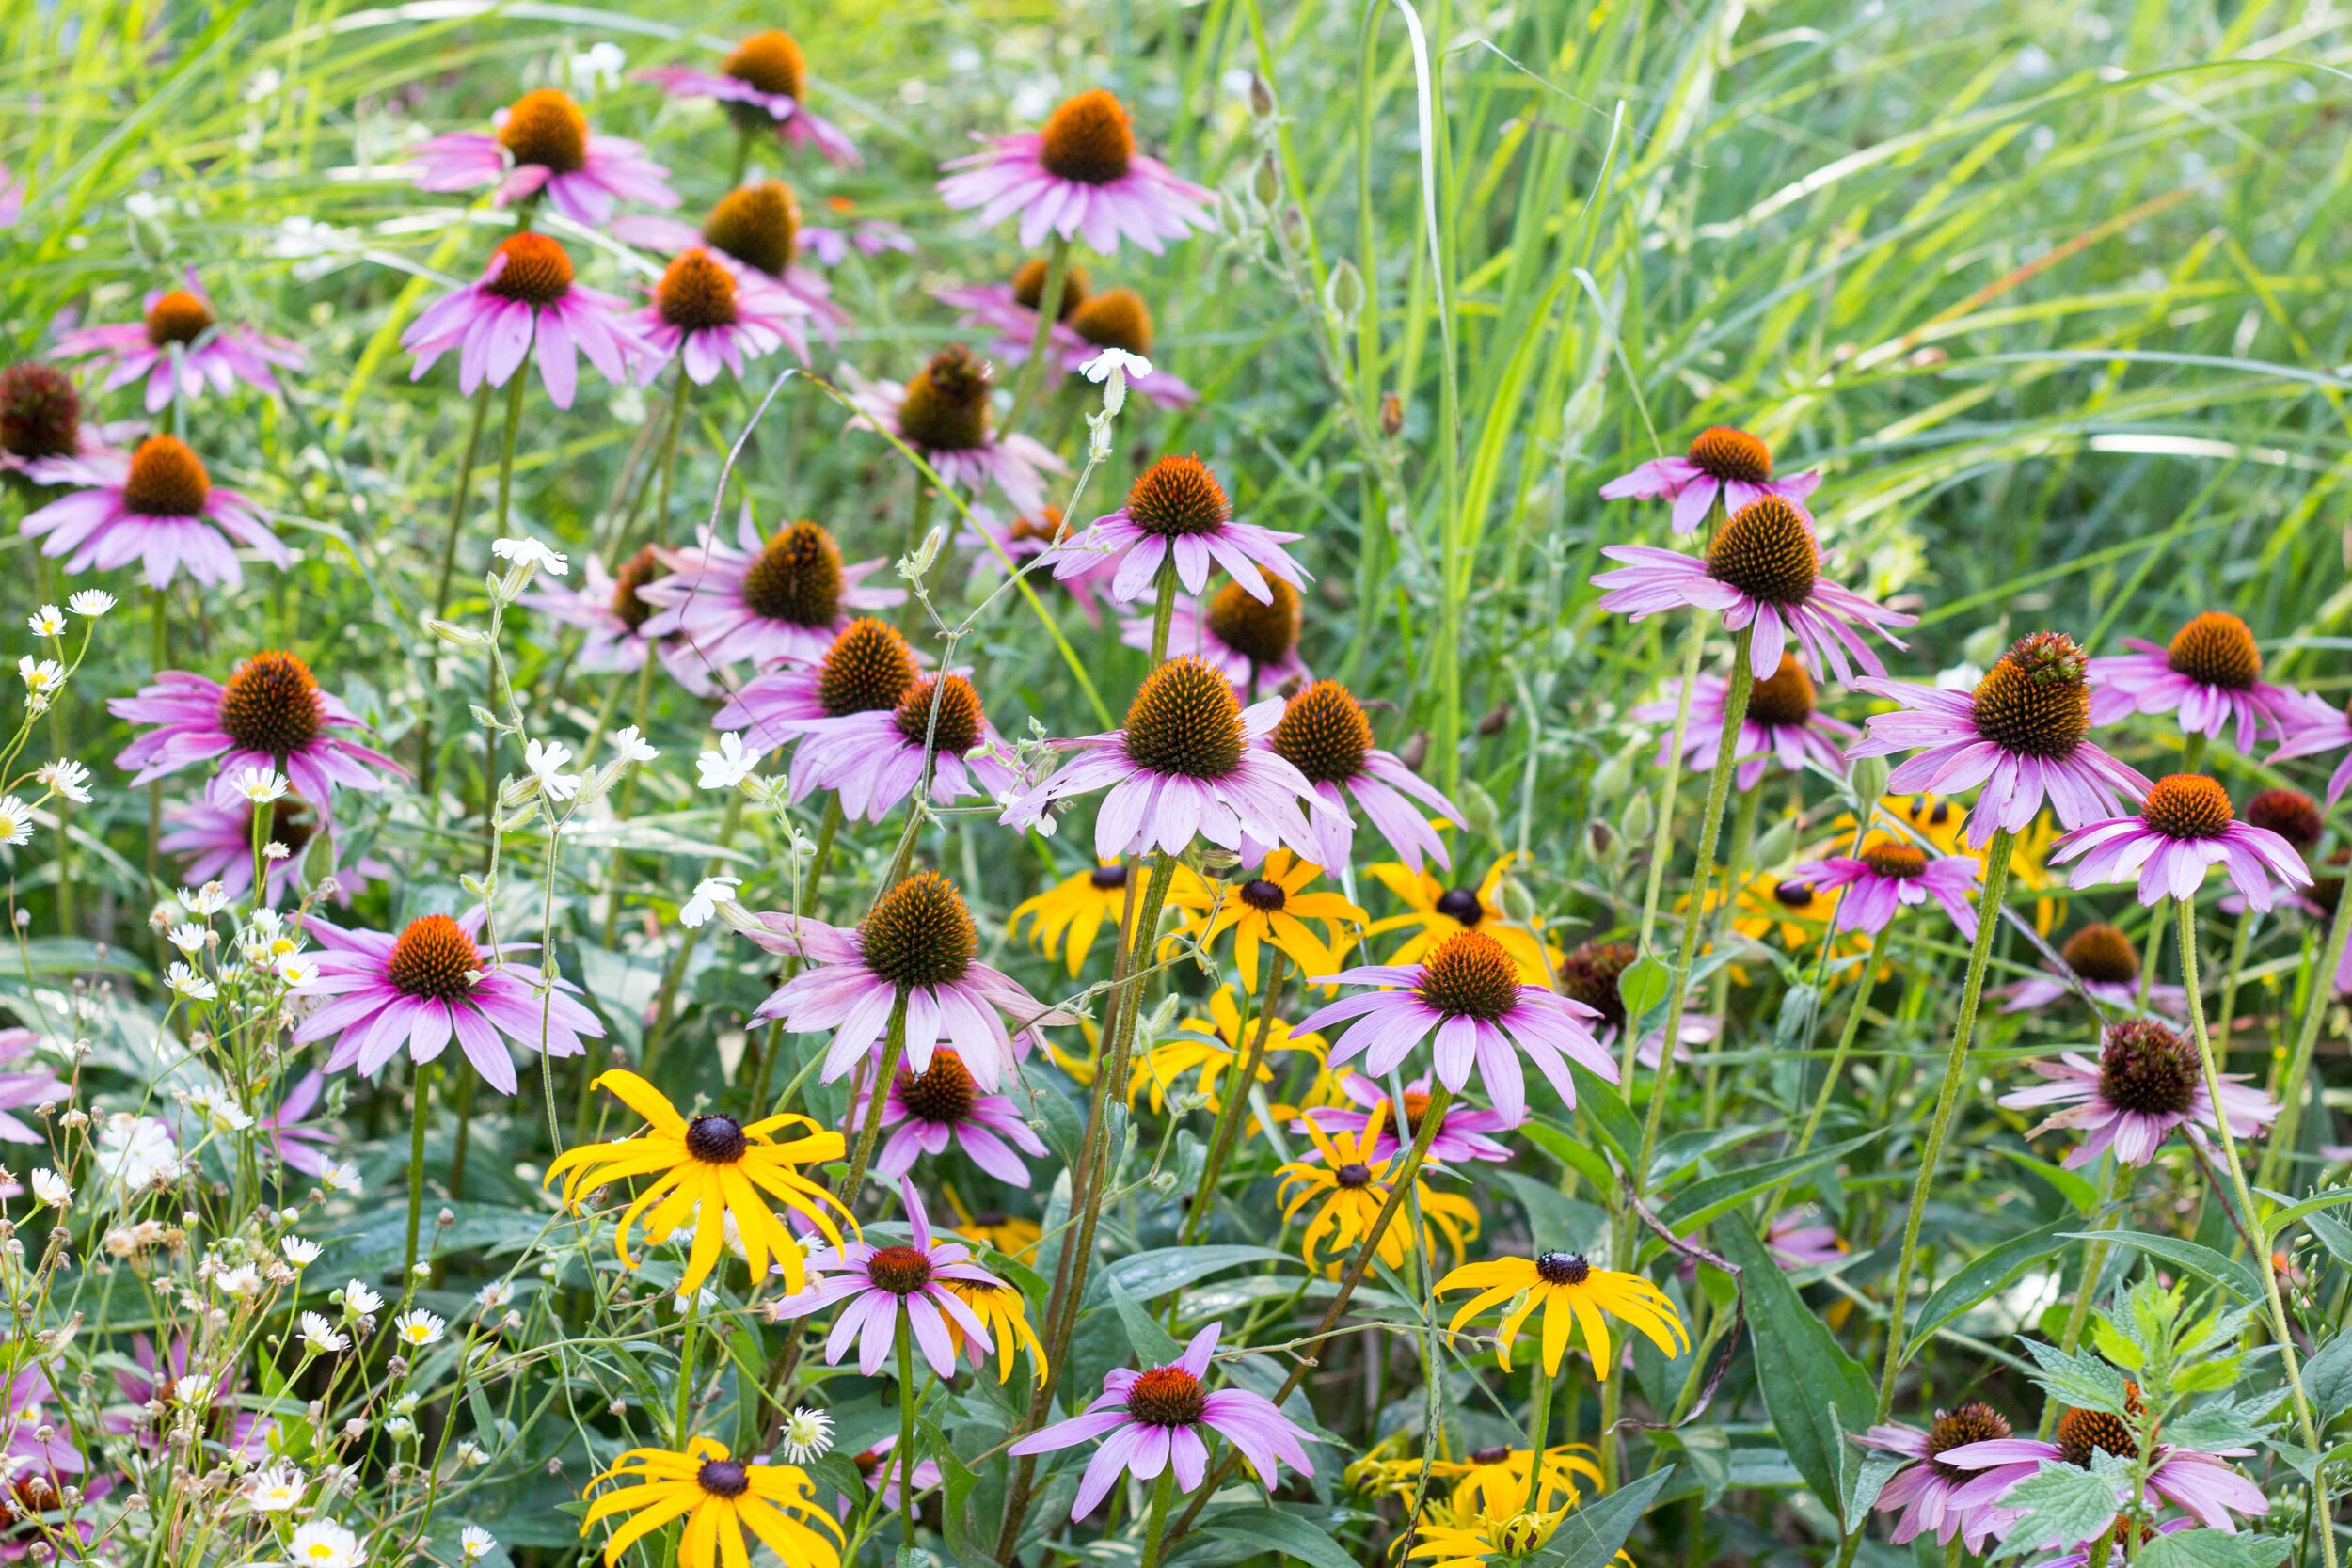 Pink coneflowers at the inn